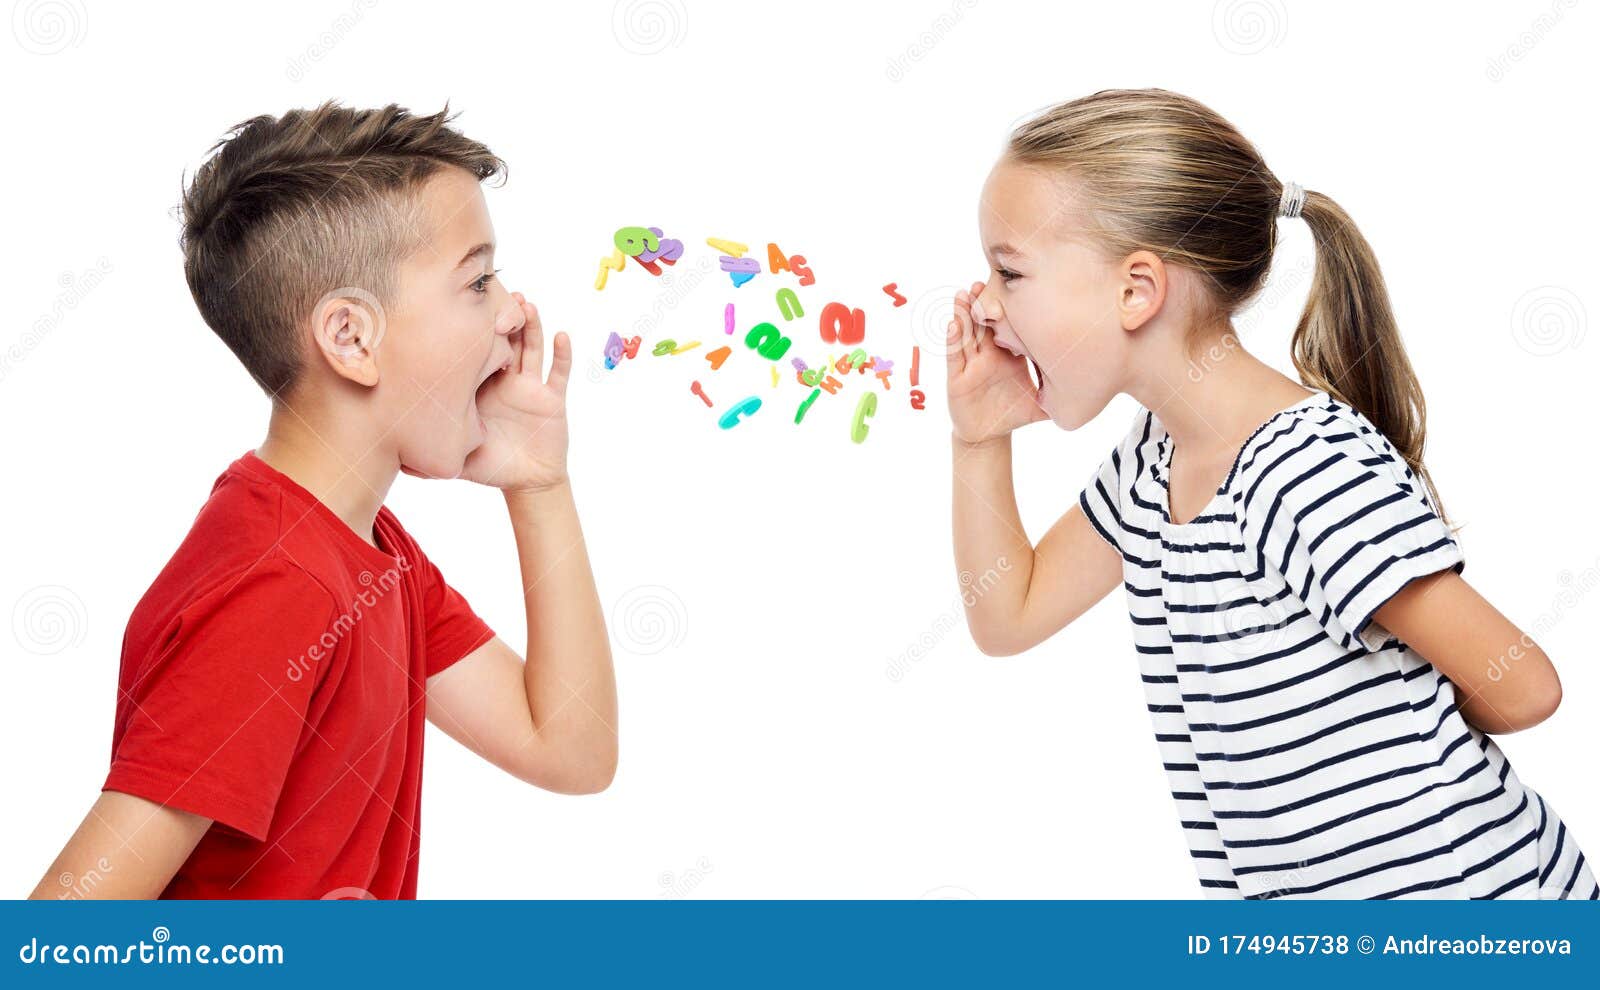 children shouting out alphabet letters. speech therapy concept over white background.